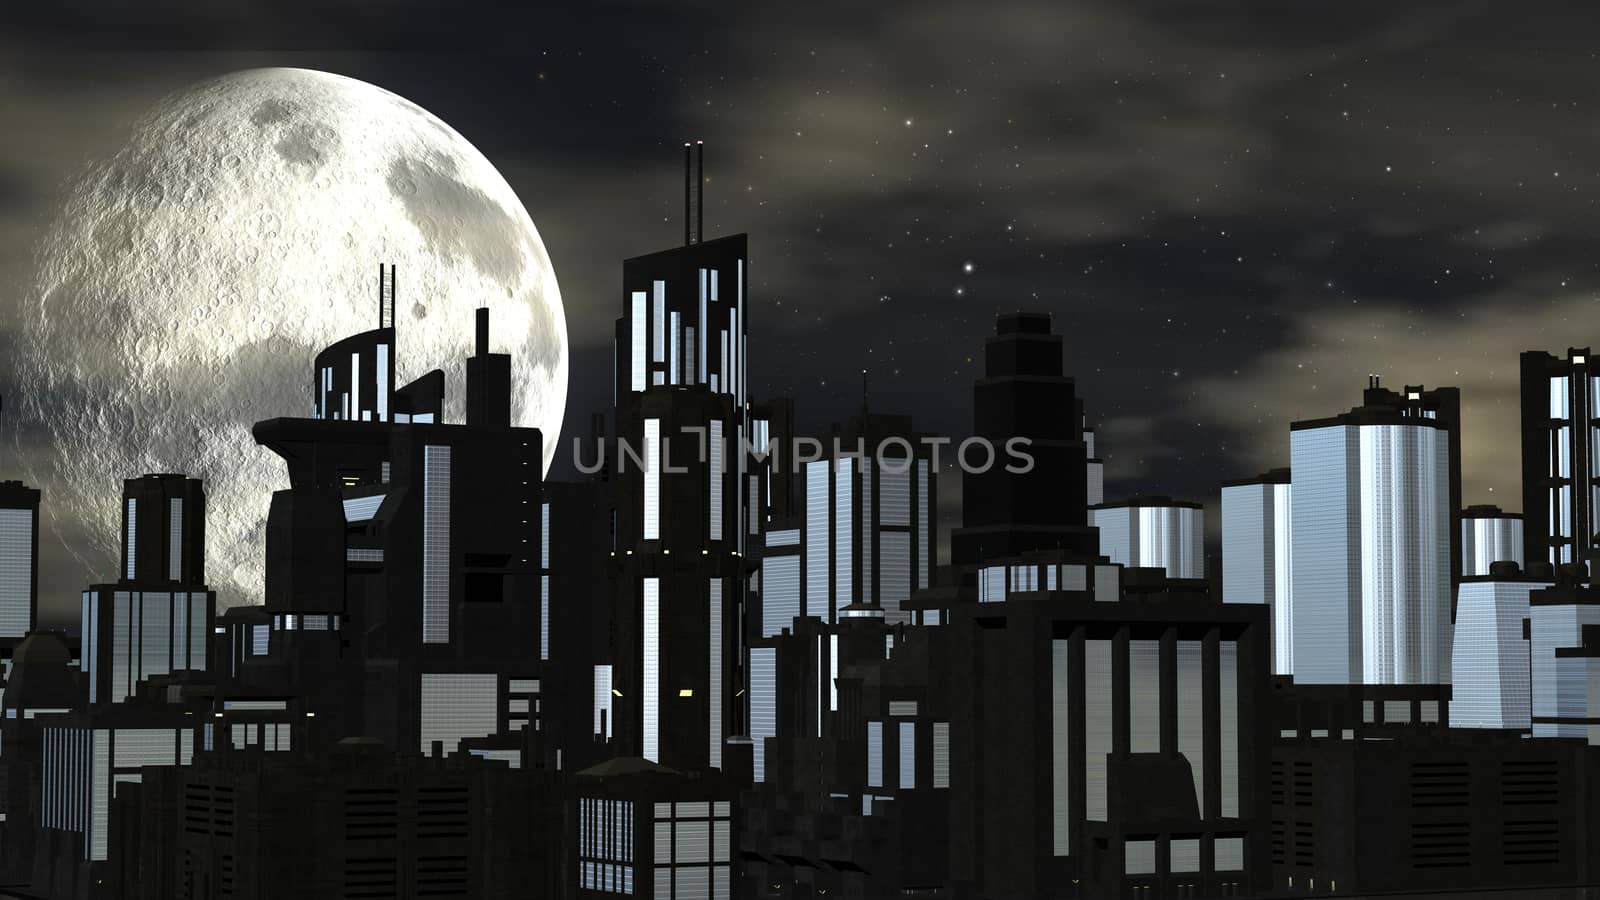 Night Futuristic City with Big Moon by ankarb